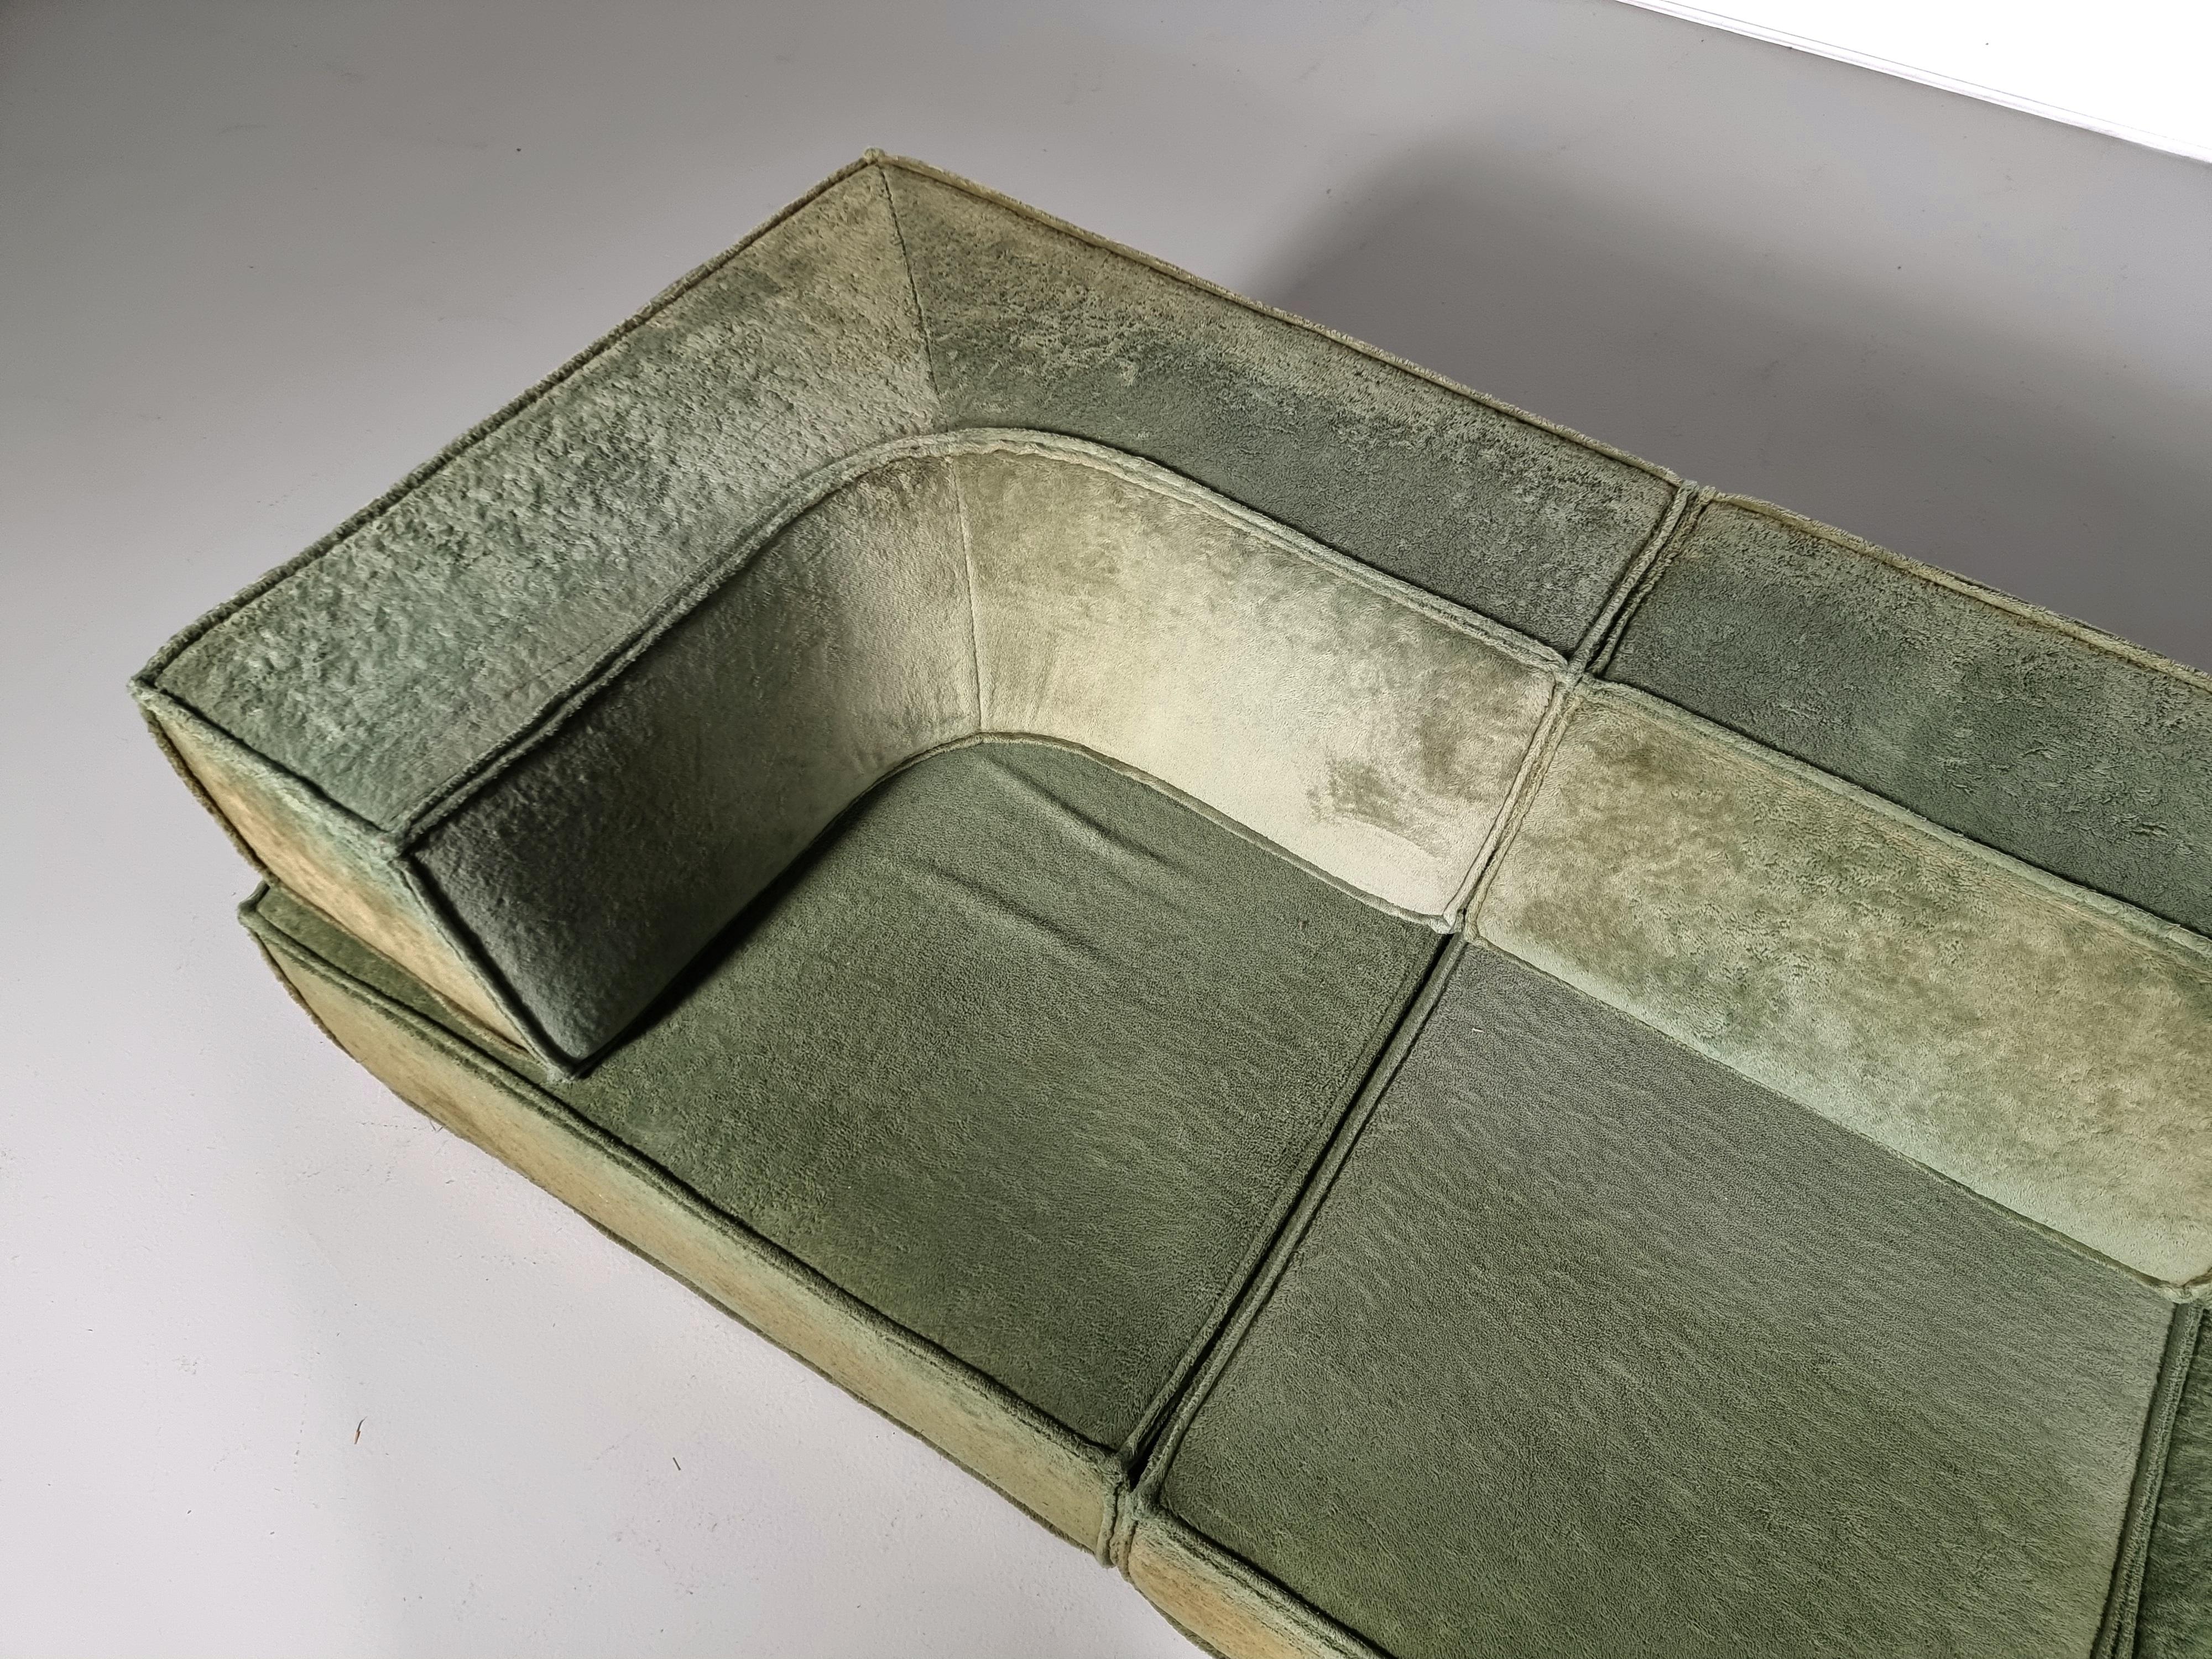 COR Trio Sofa by Team Form Ag for COR Furniture, Germany, 1970s 2